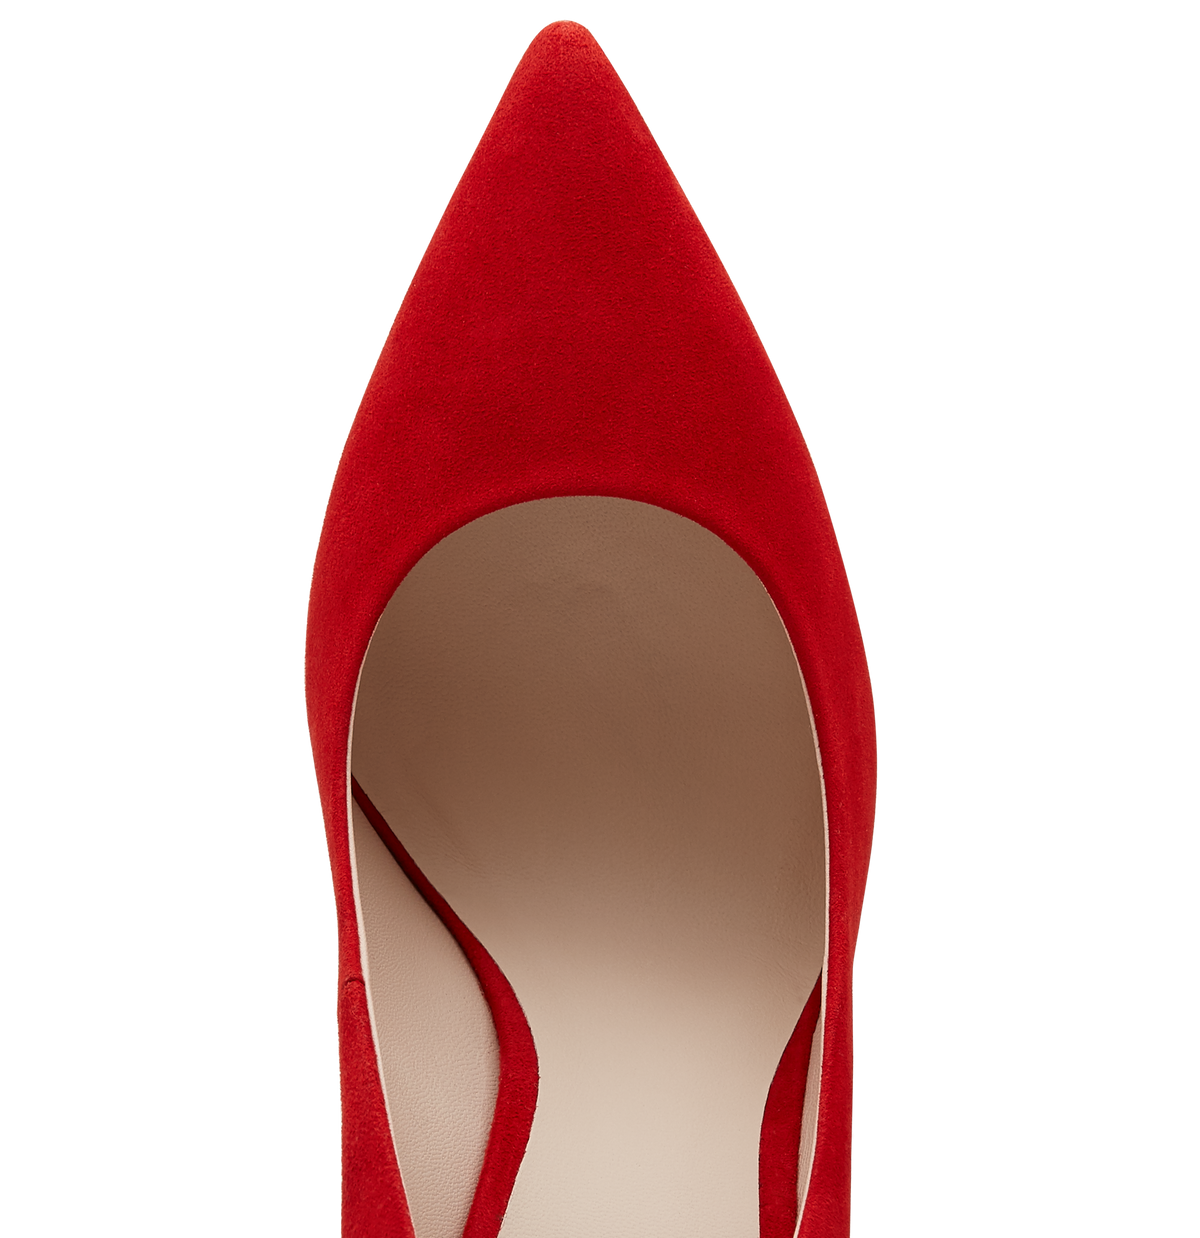 Red Suede Empire Pumps With Rose Gold Hardware